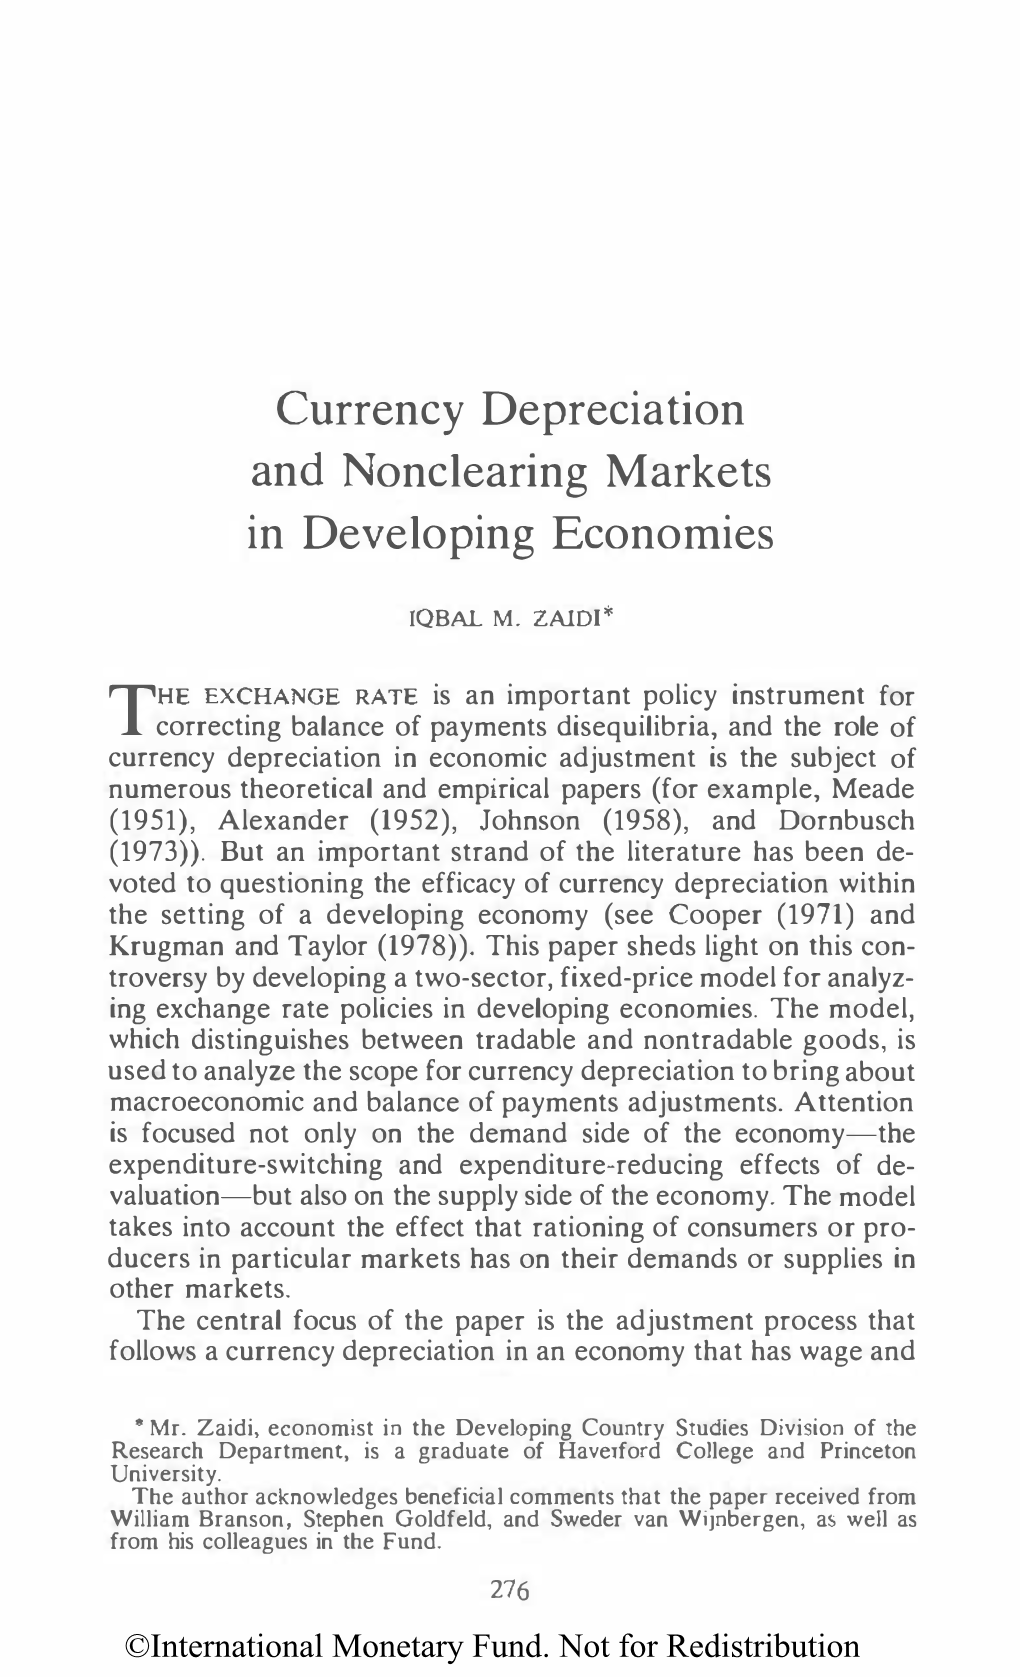 Currency Depreciation and Nonclearing Markets in Developing Economies